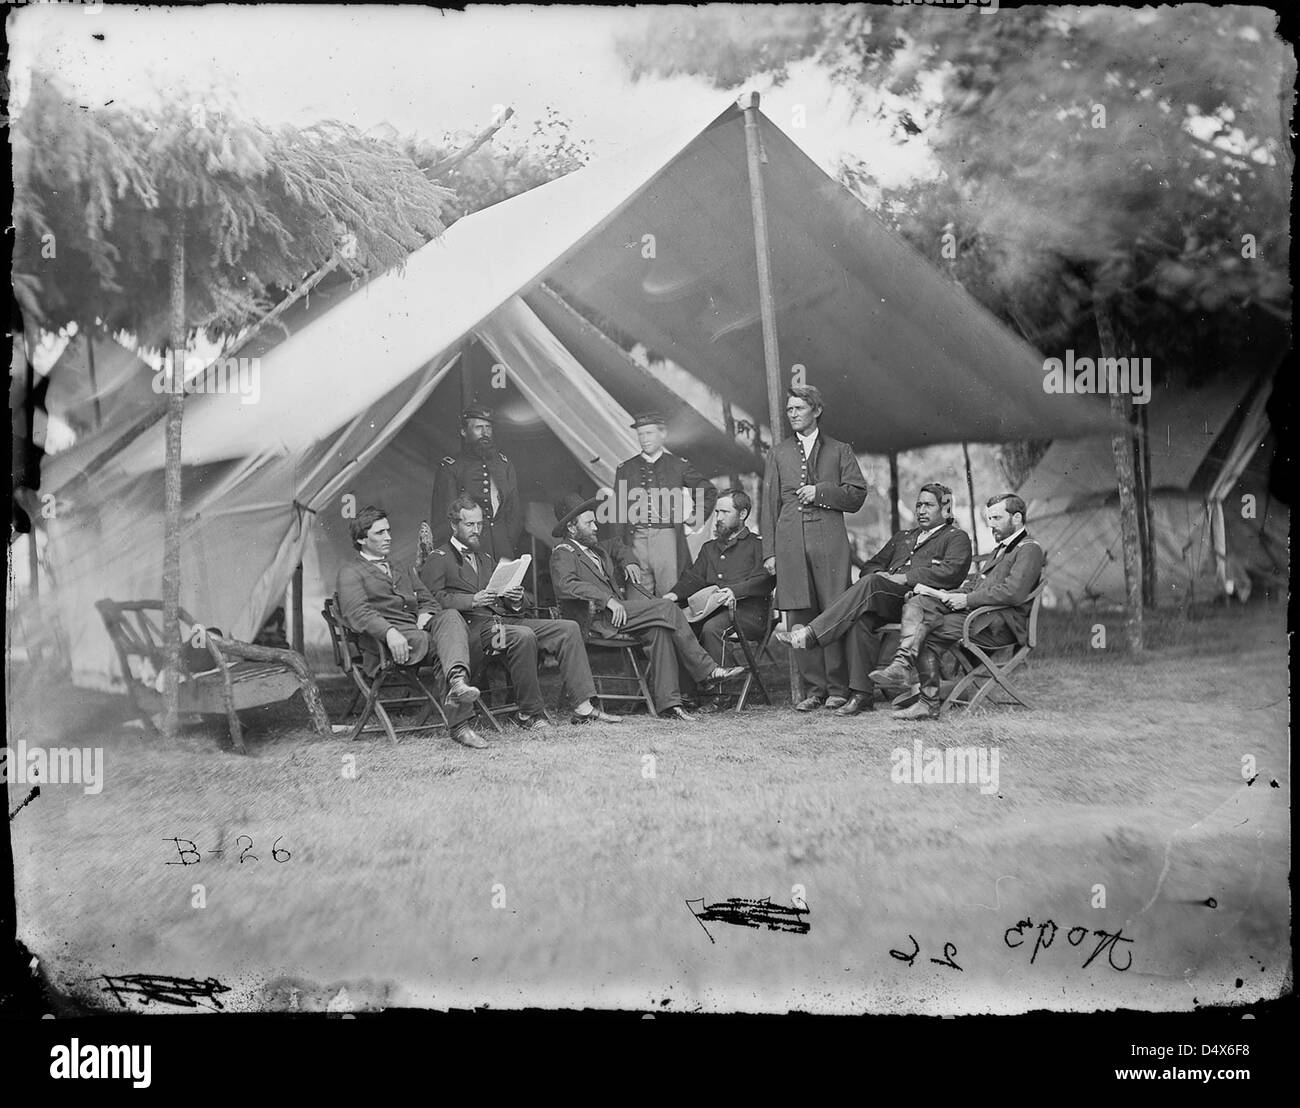 General Ulysses S. Grant and Staff of Eight, Recognized -- Major O.E. Babcock, Colonel William Mck. Dunn, Captain Henry W. Janes, Colonel Ely S. Parker, General Cyrus B. Comstock, Captain Peter T. Hudson, Colonel Michael R. Morgan, General John A. Rawlins Stock Photo